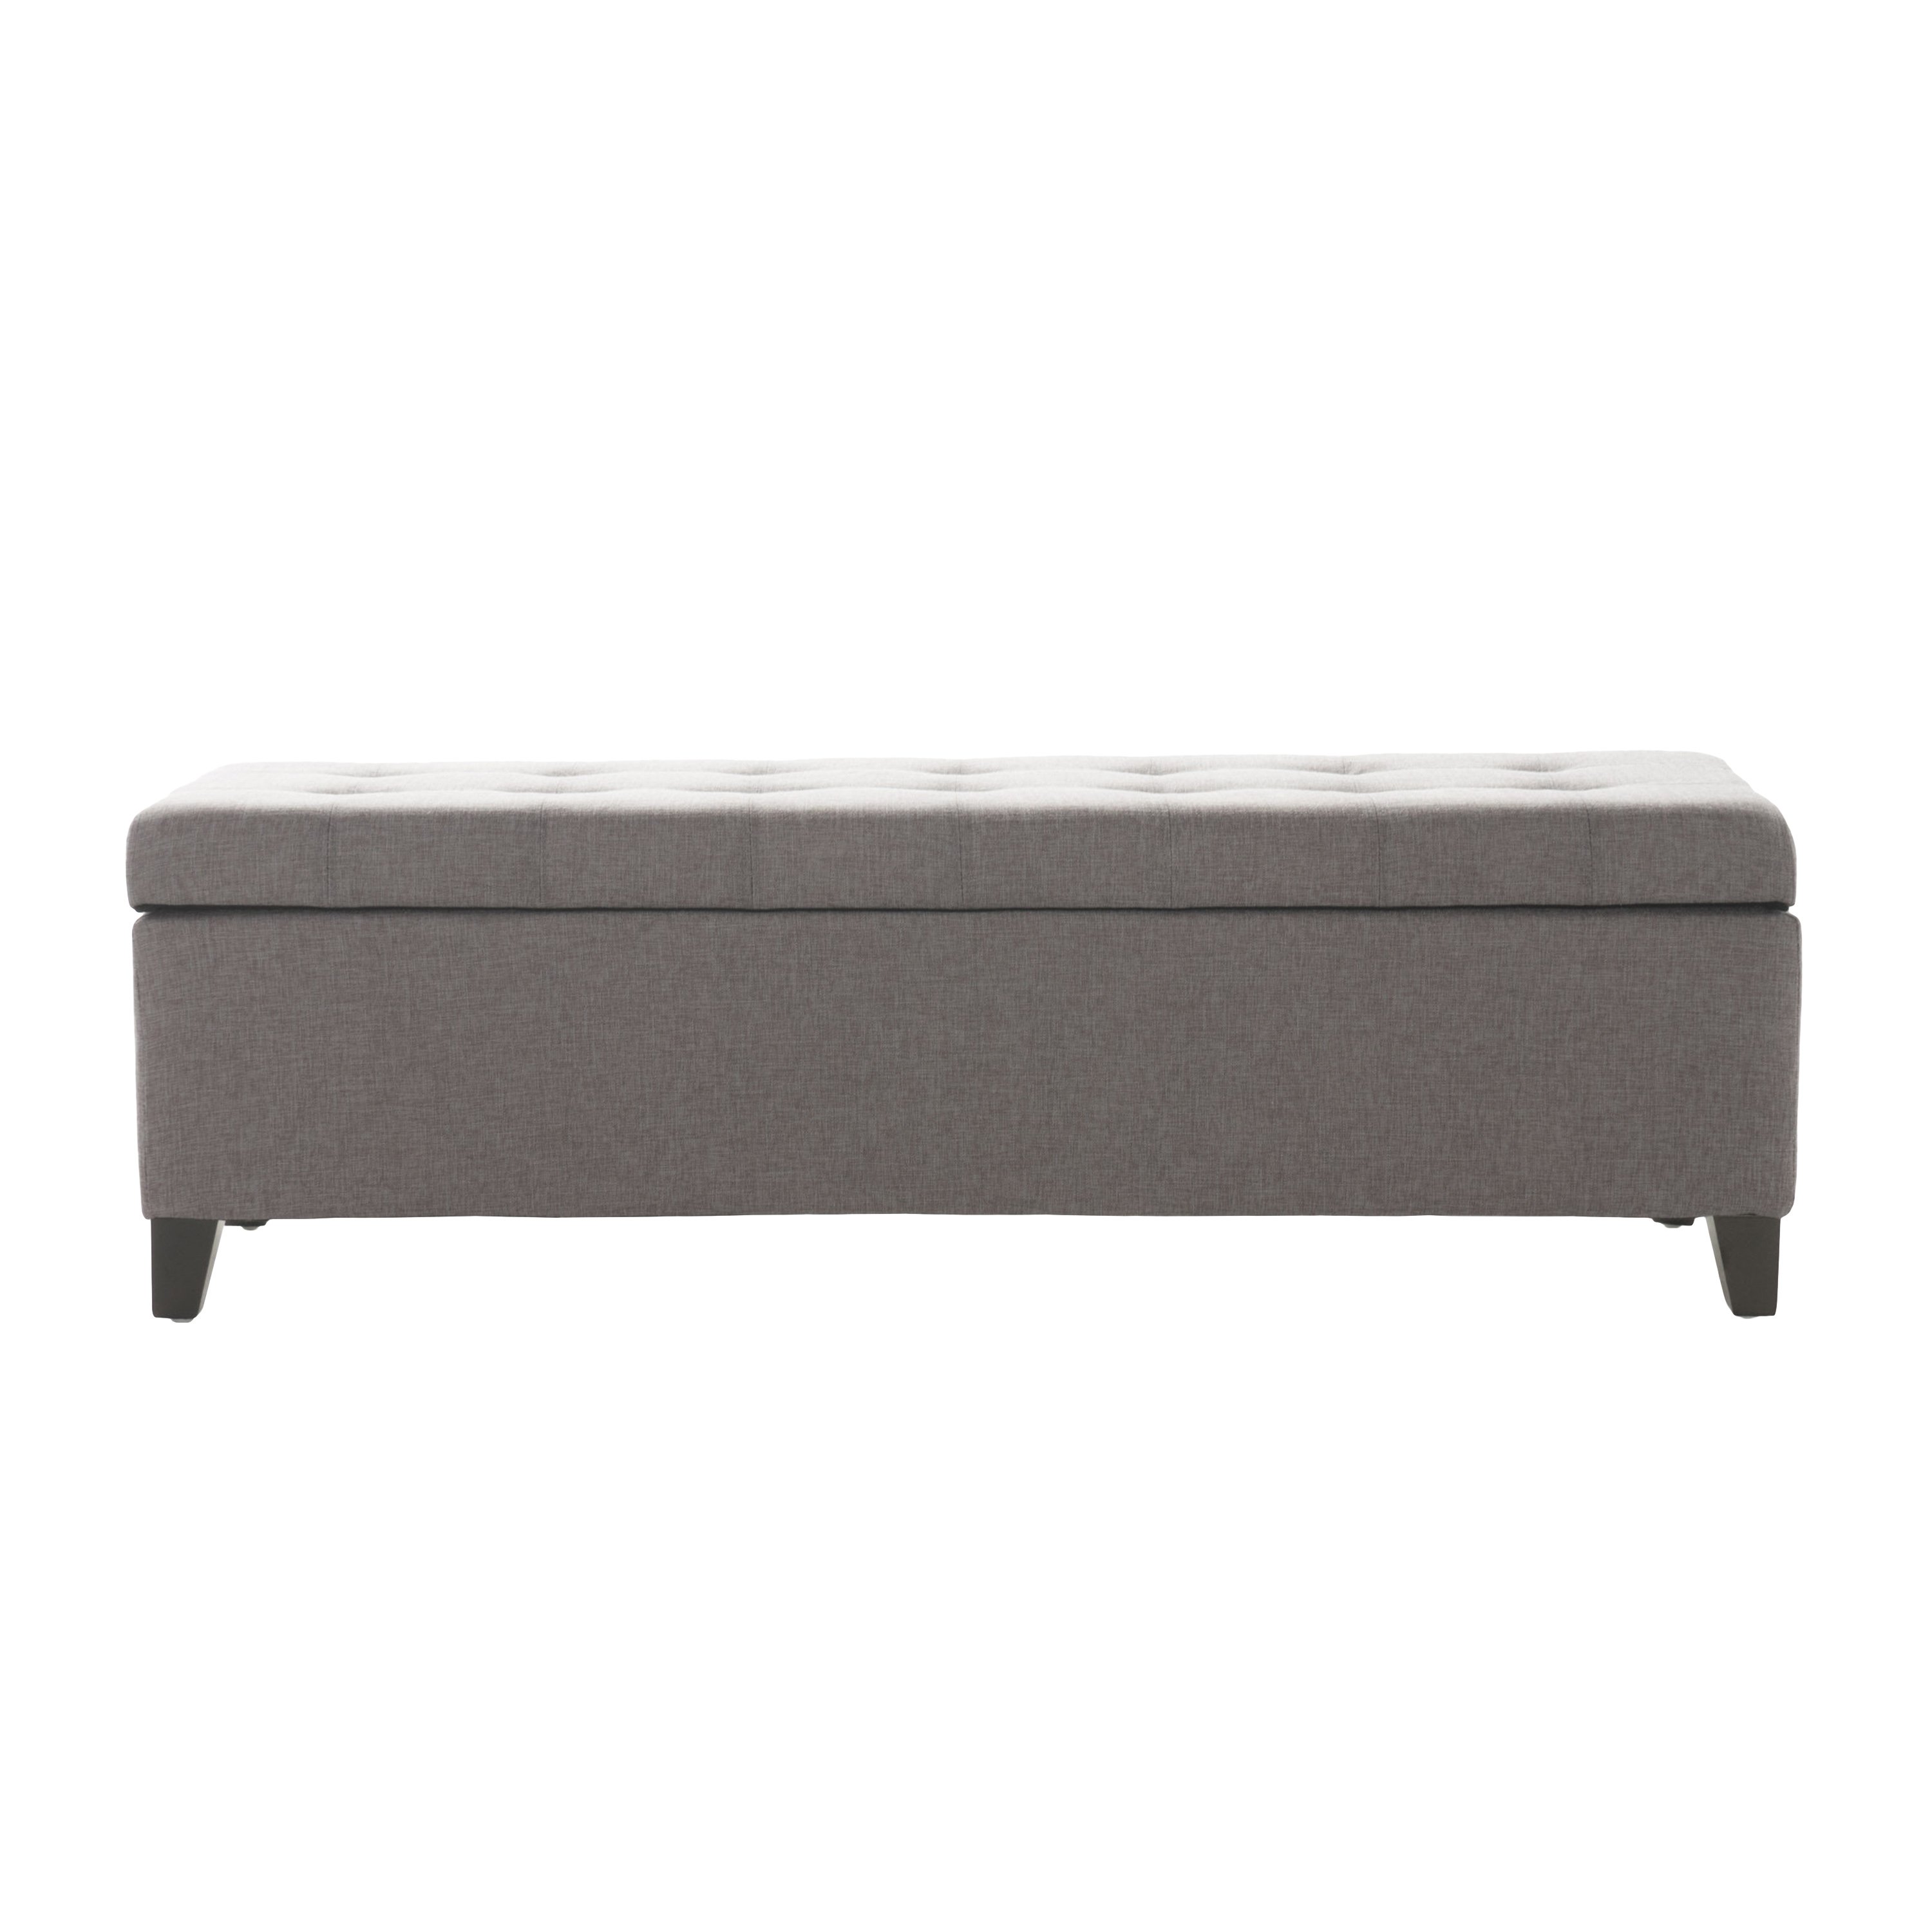 Sterling Fabric Tufted Storage Ottoman - Gray